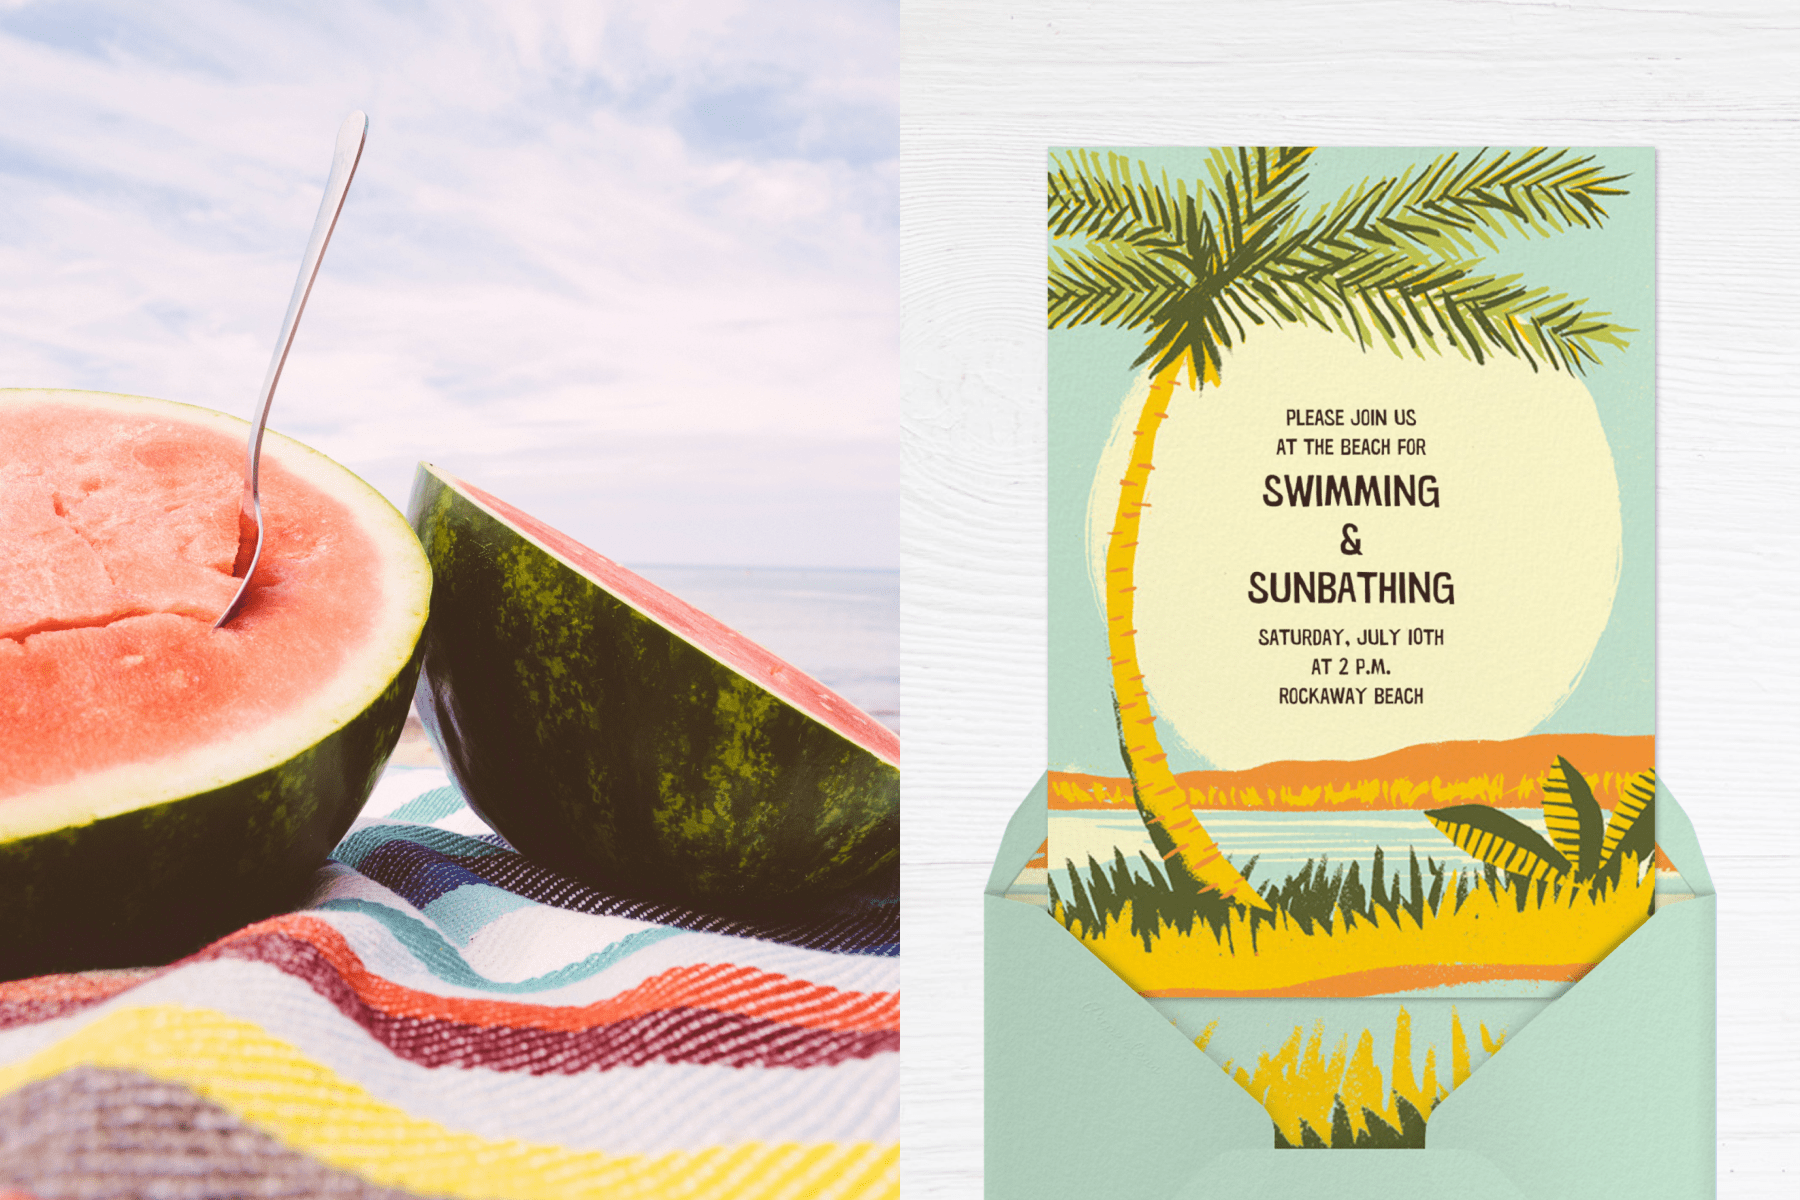 Left: A watermelon cut in halves at the beach. Right: An invitation with an illustration of a palm tree in front of the sun and water. 